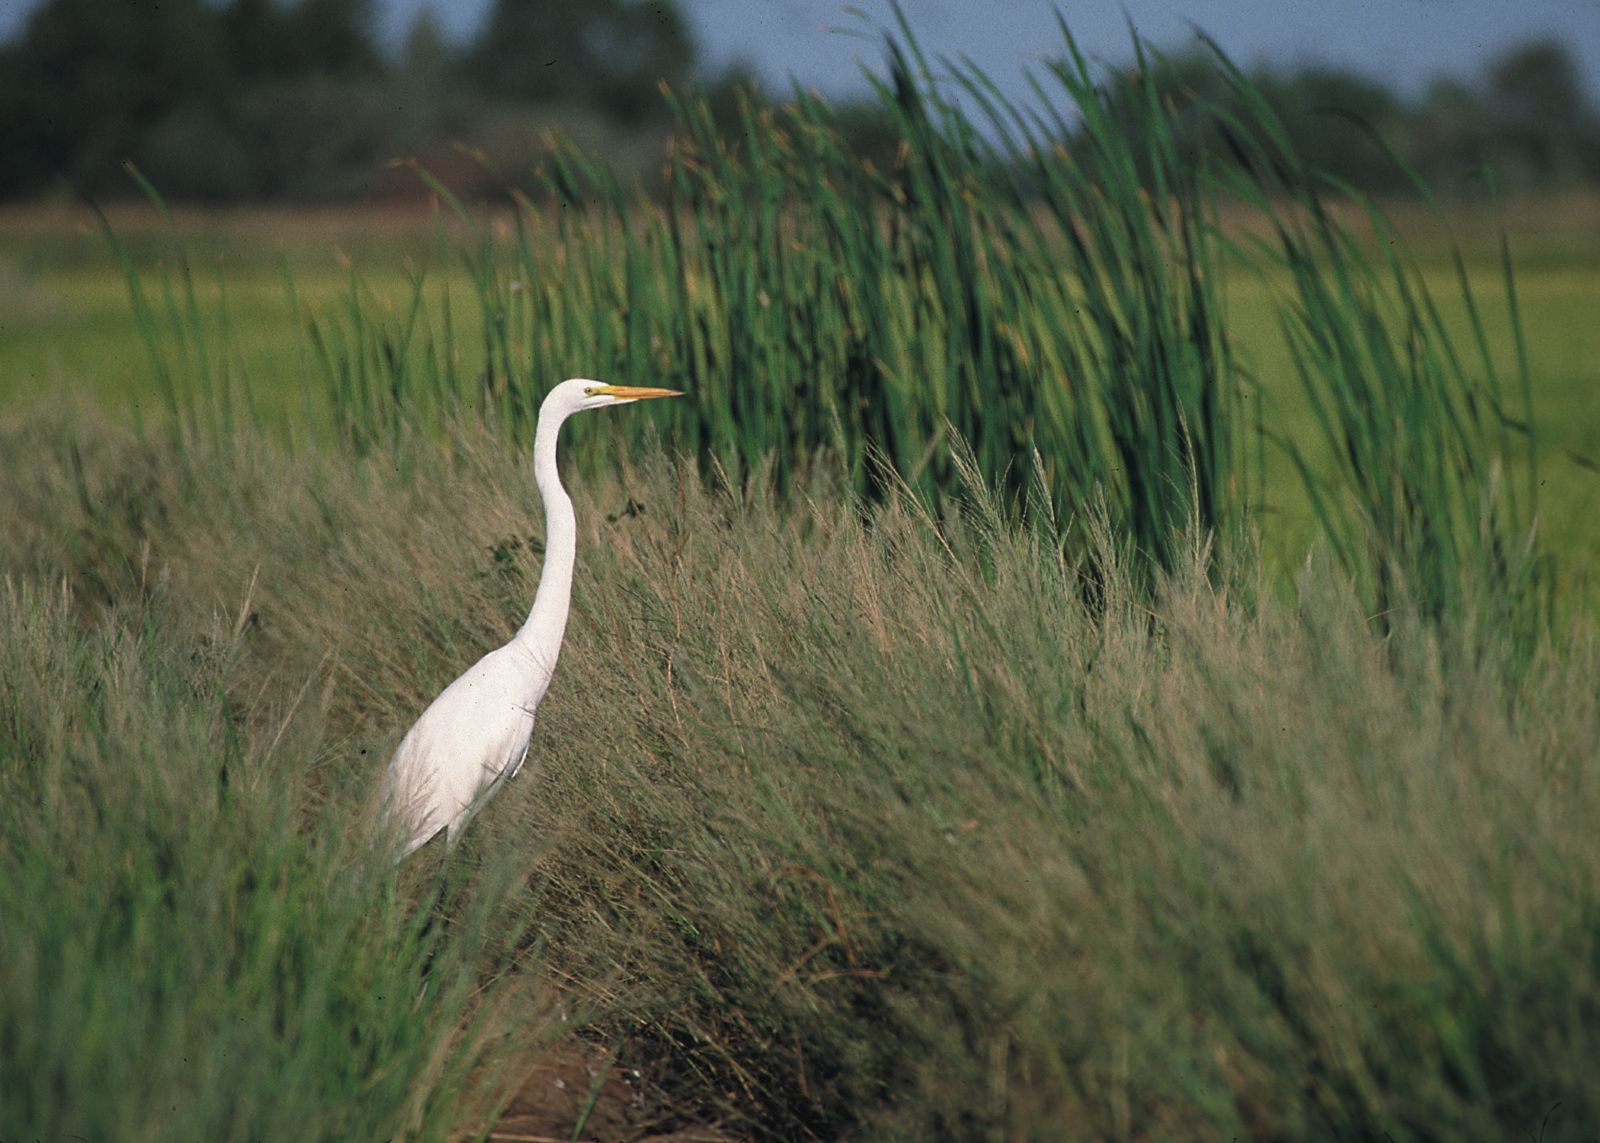 Egret in Grass Buffer– one of the conservation practices highlighted by the new report. Photo credit: Gary Kramer NRCS, USDA